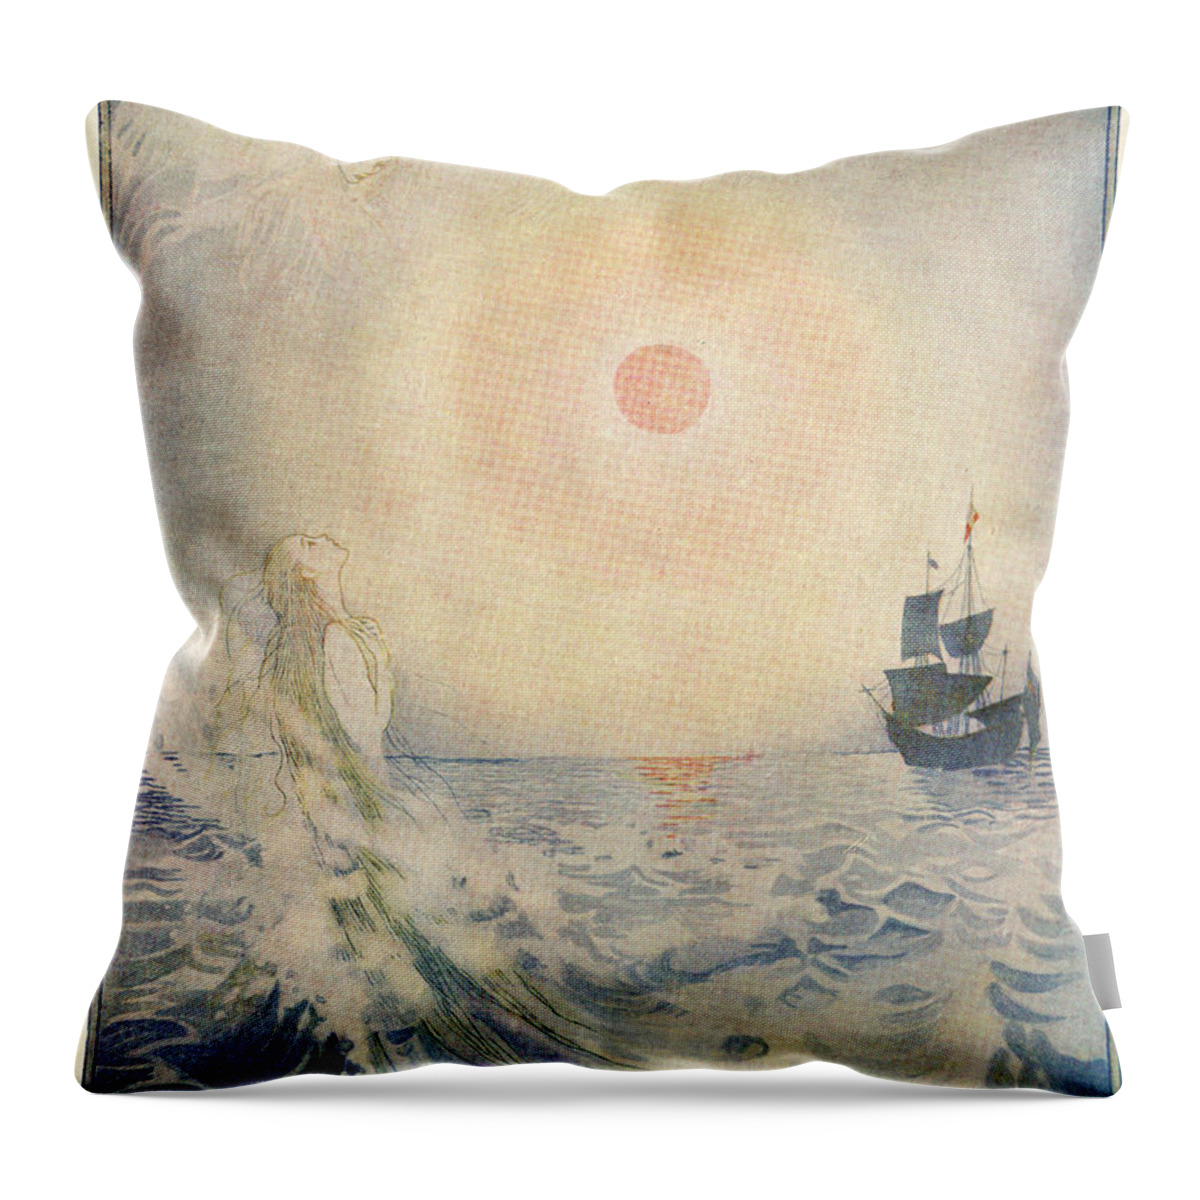 Little Mermaid Throw Pillow featuring the mixed media The Little Mermaid, Illustration from by Honor C Appleton